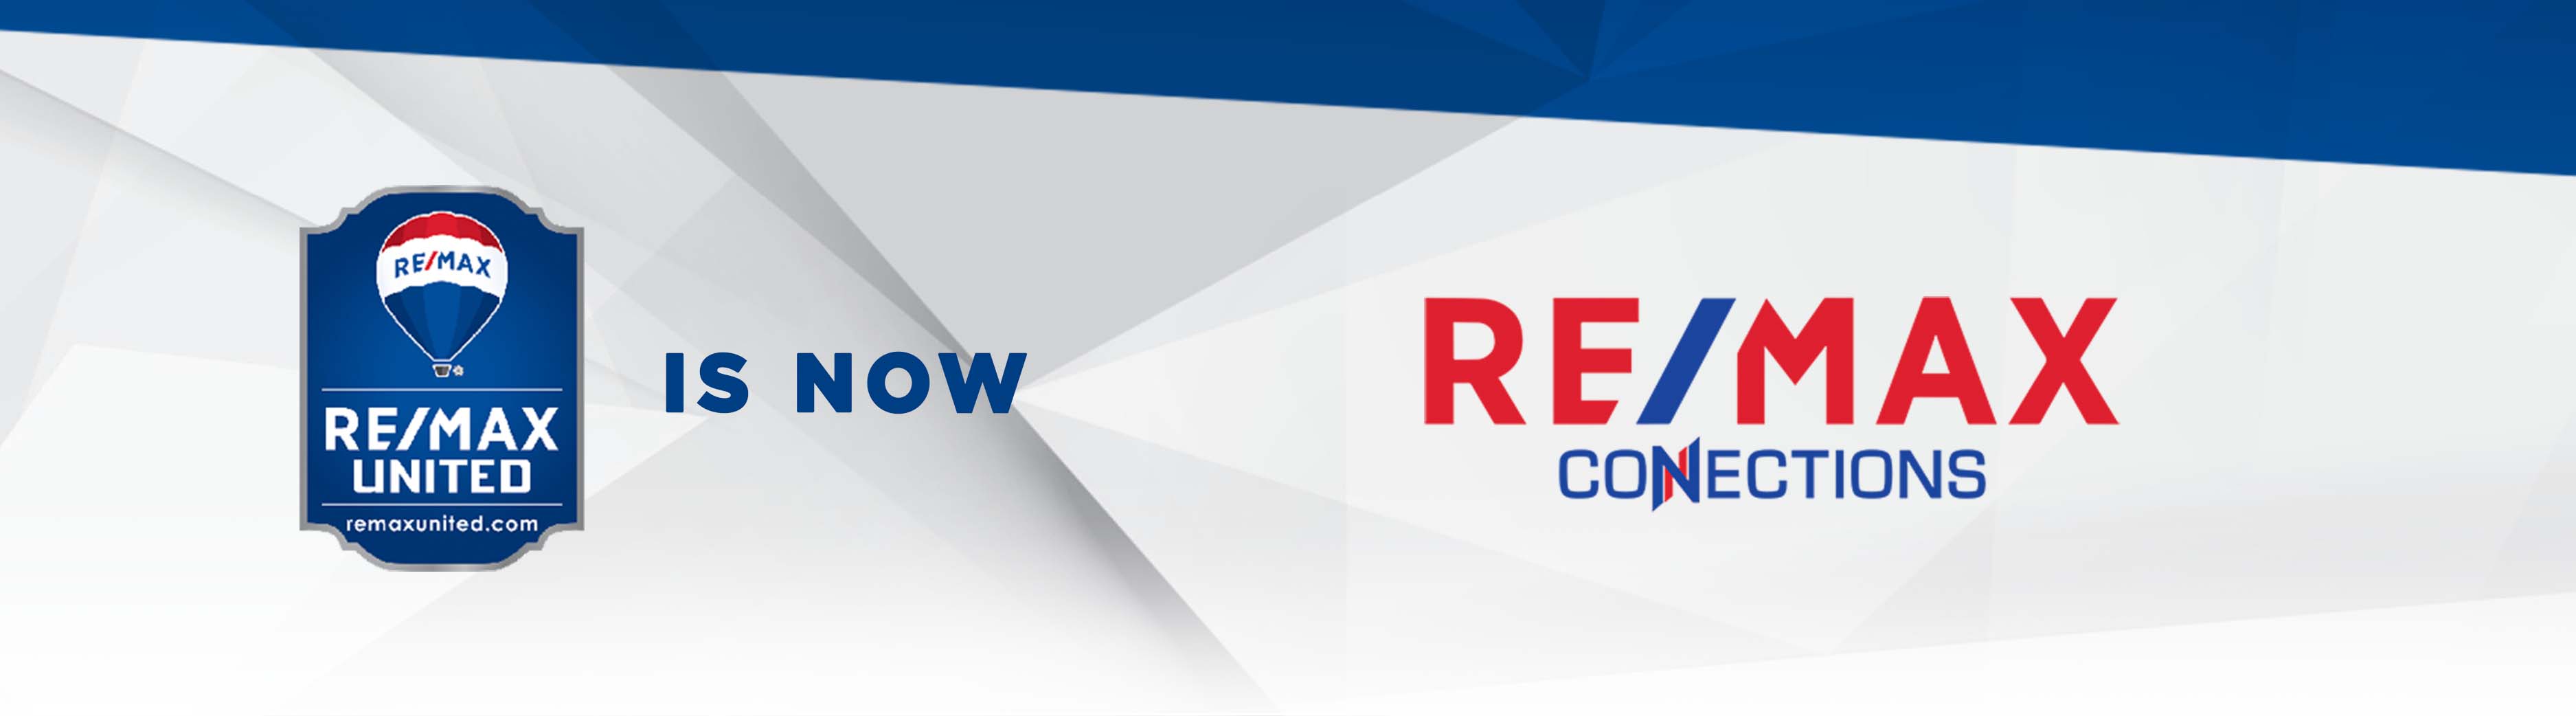 RE/MAX United is now RE/MAX Connections